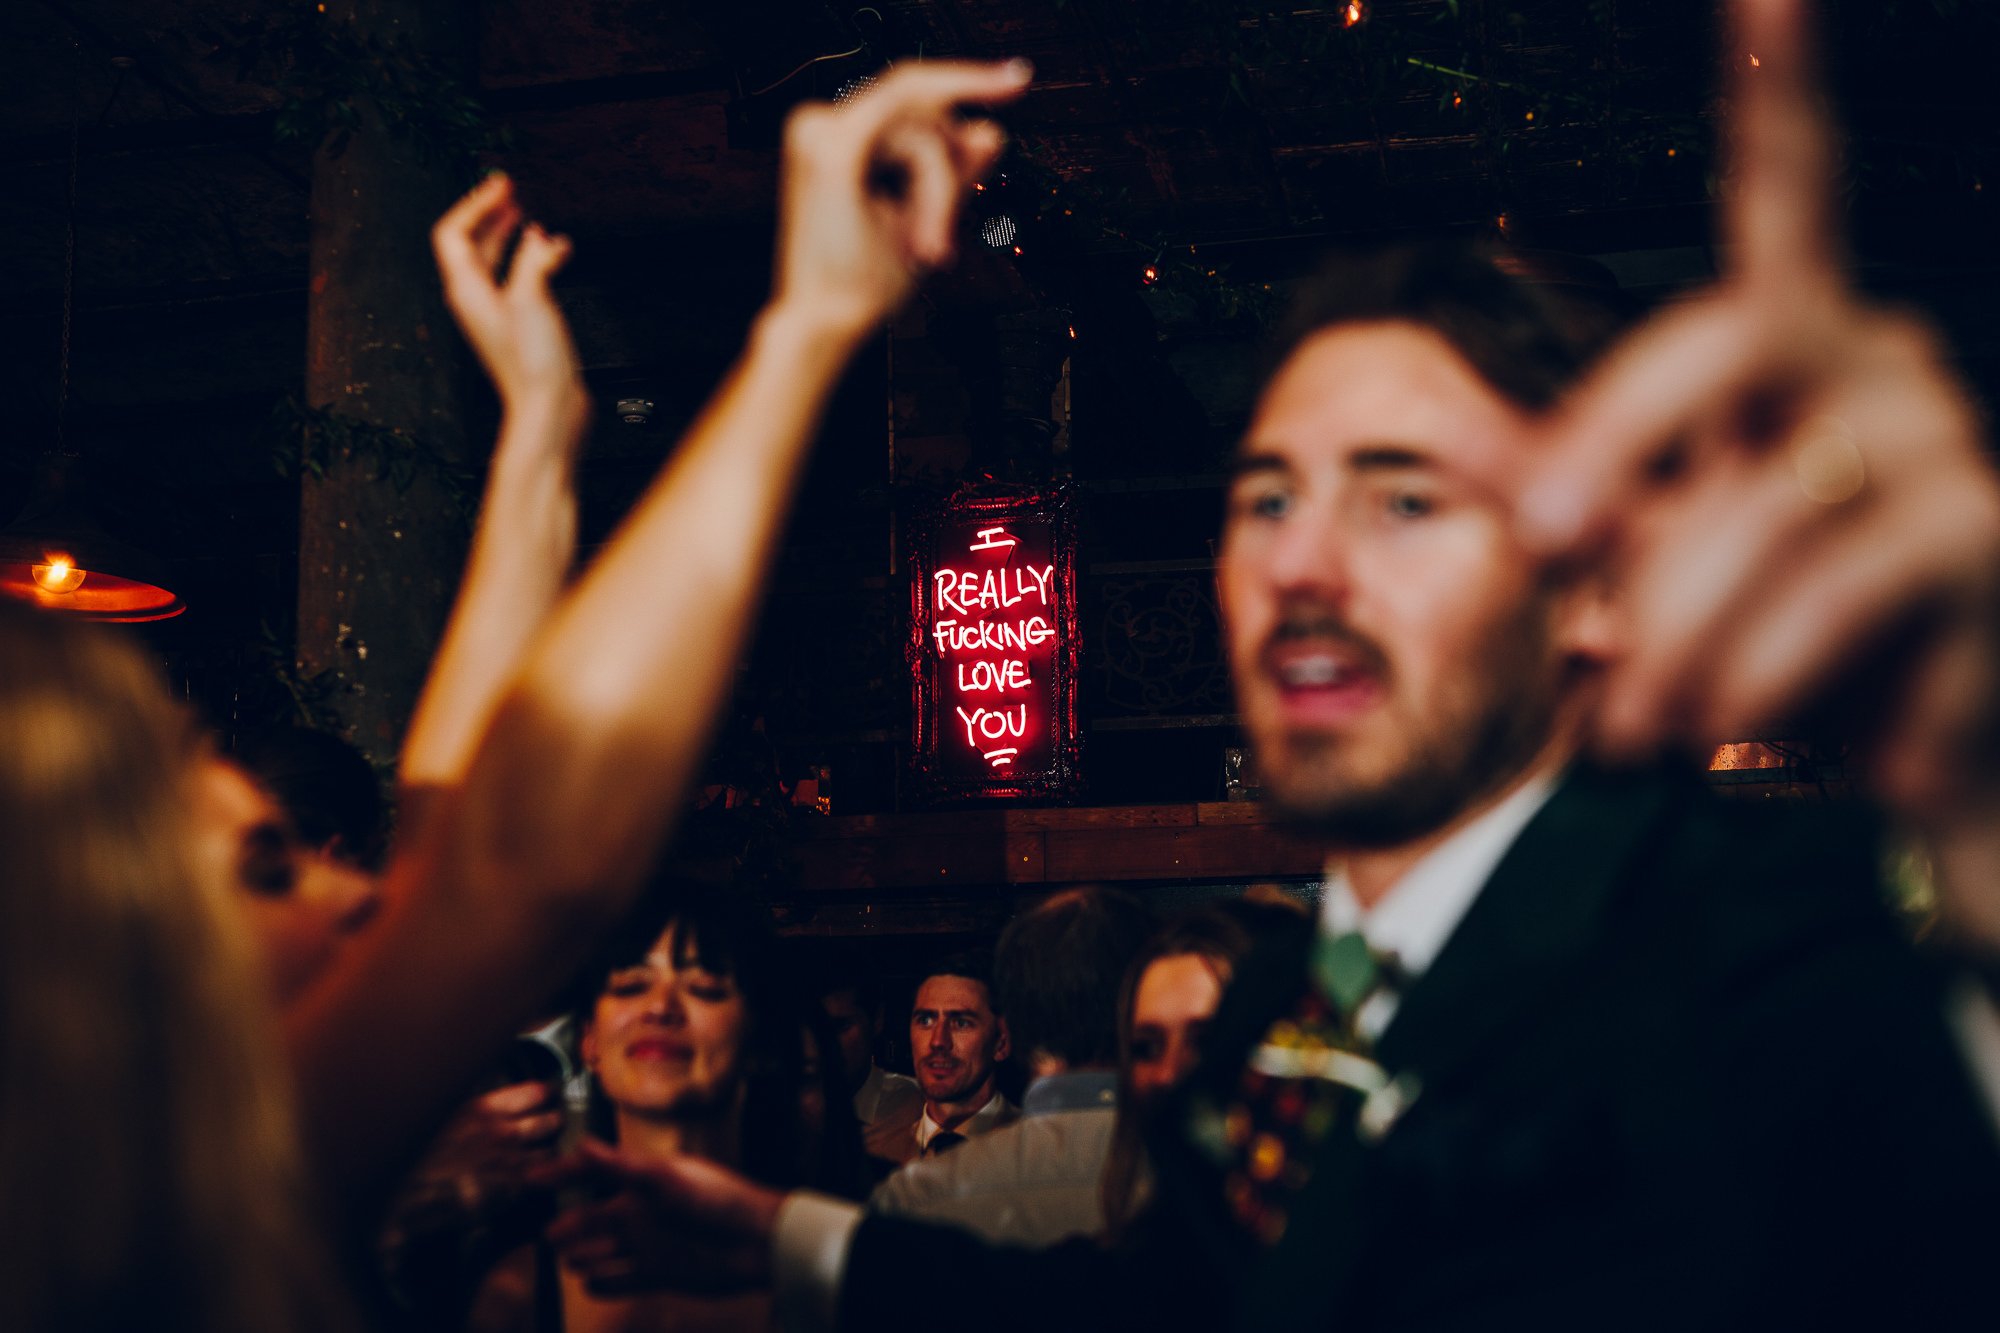  REALLY FUCKING LOVE YOU pink neon sign is clear in the background of this cool, modern image where the wedding guests are pictured blurred as they dance.  